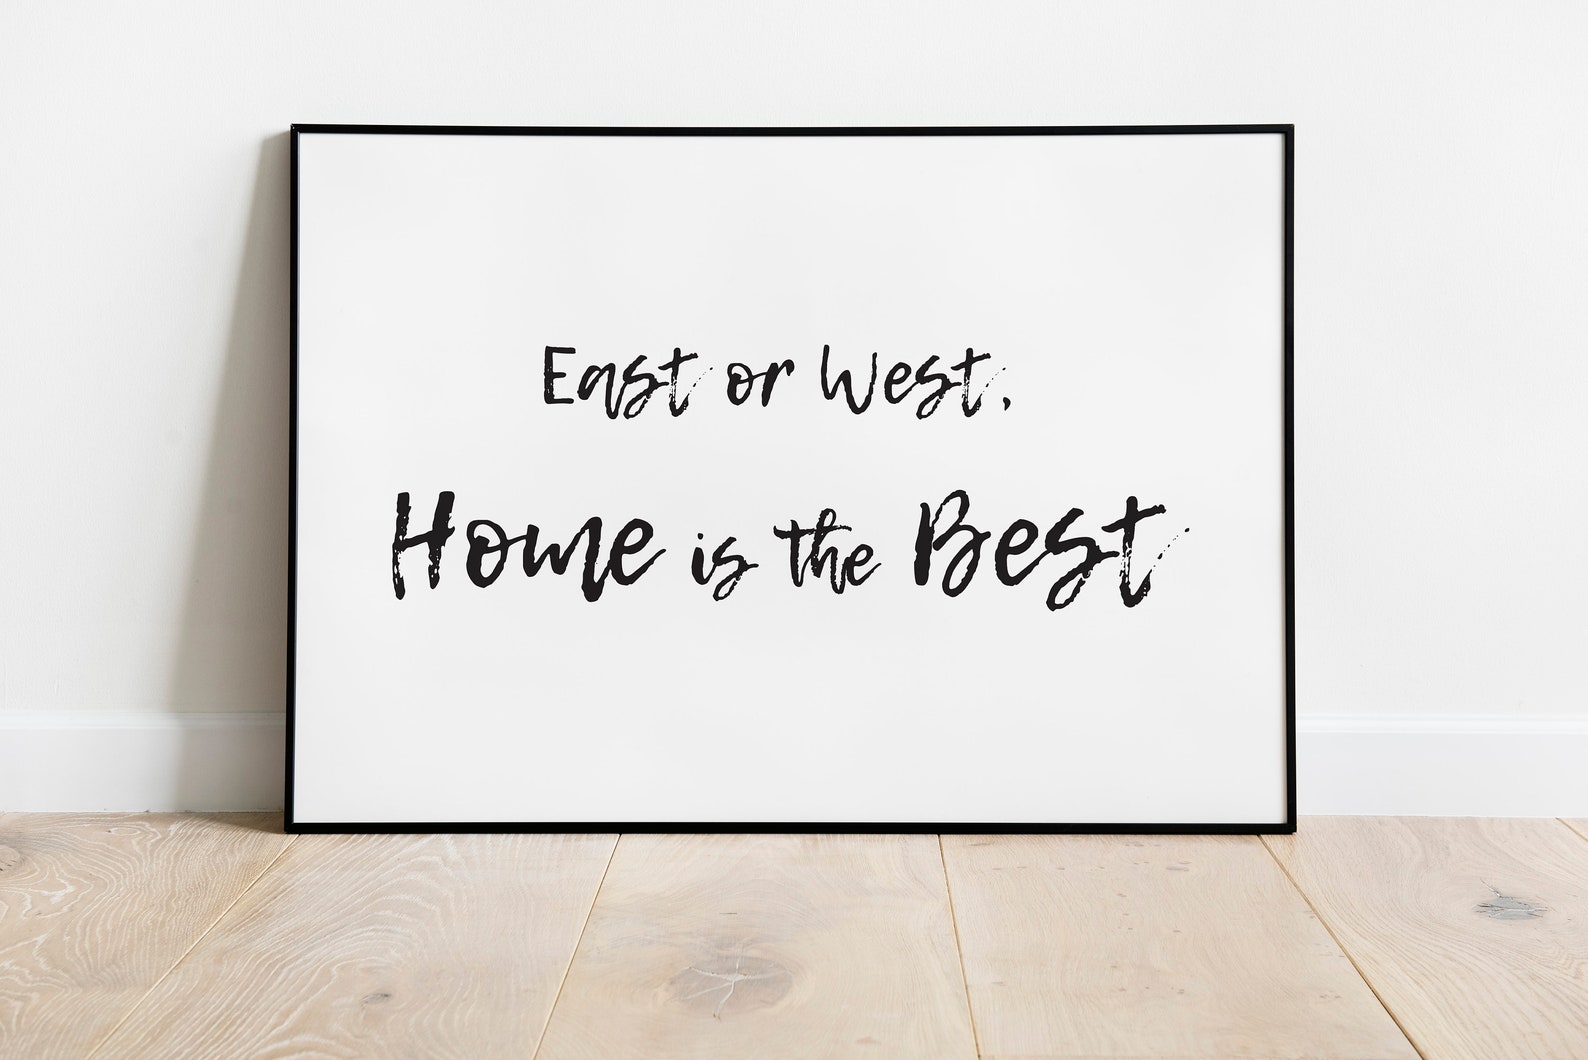 east or west home is the best essay 300 words